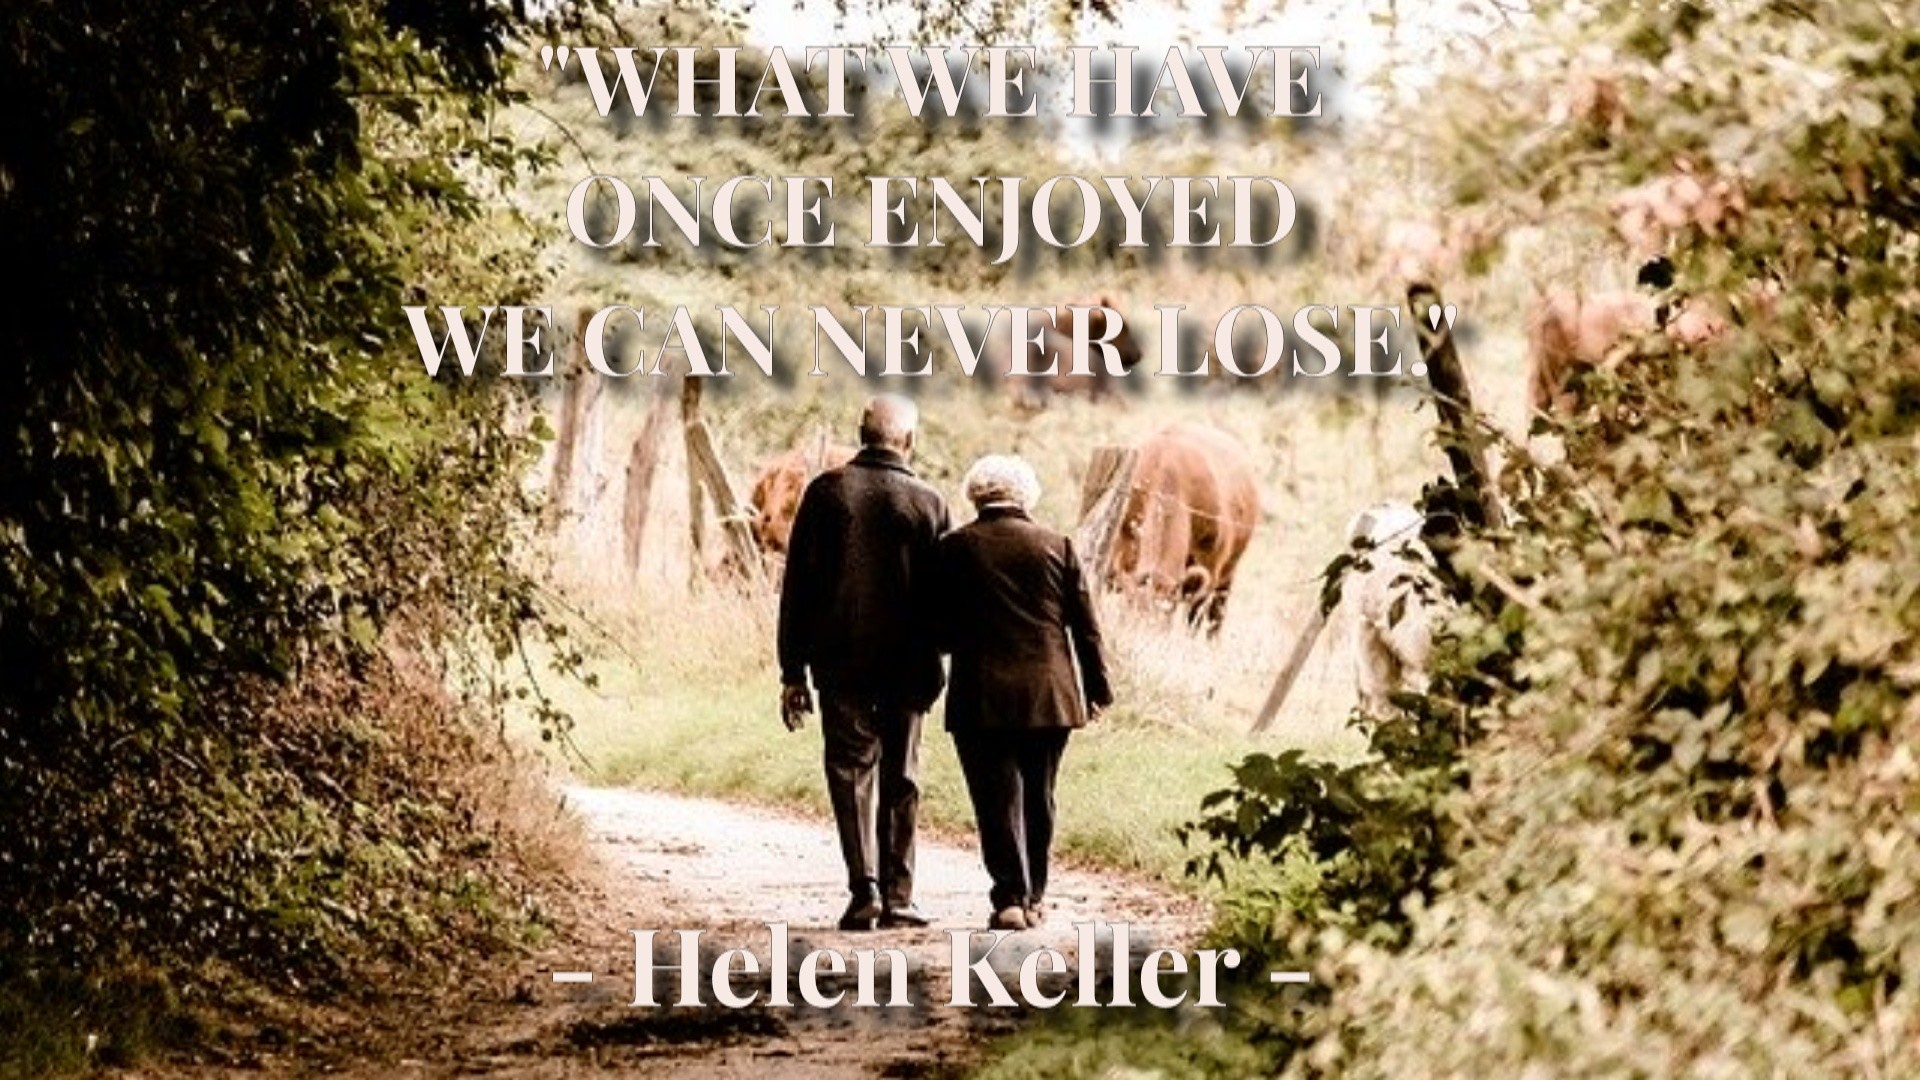 What we have once enjoyed we can never lose - Helen Keller